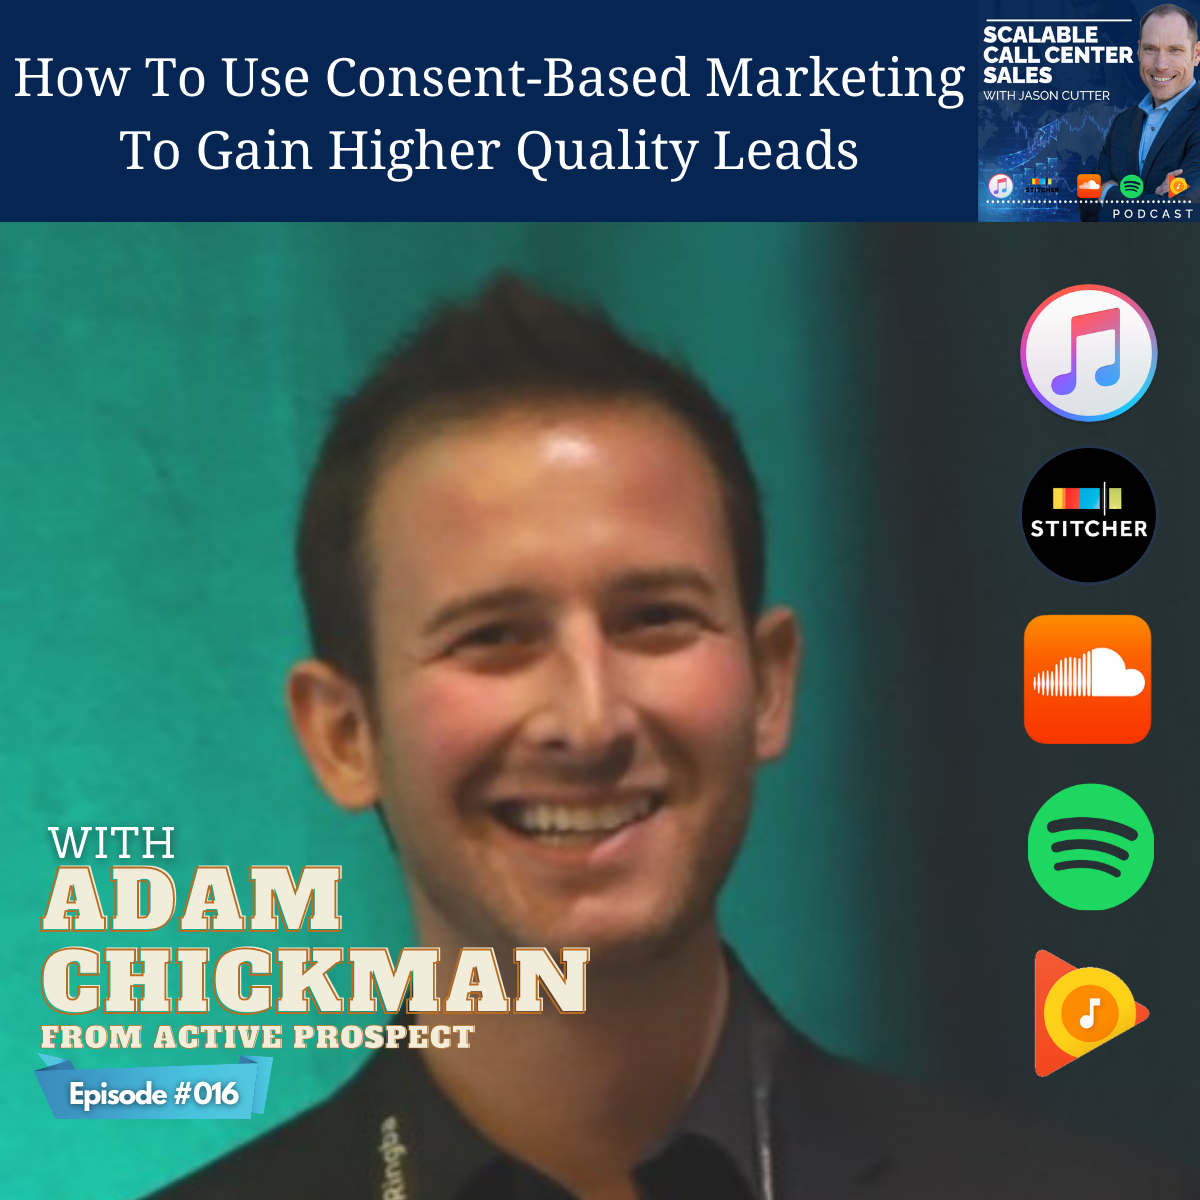 [016] How To Use Consent-Based Marketing To Gain Higher Quality Leads, with Adam Chickman from Active Prospect